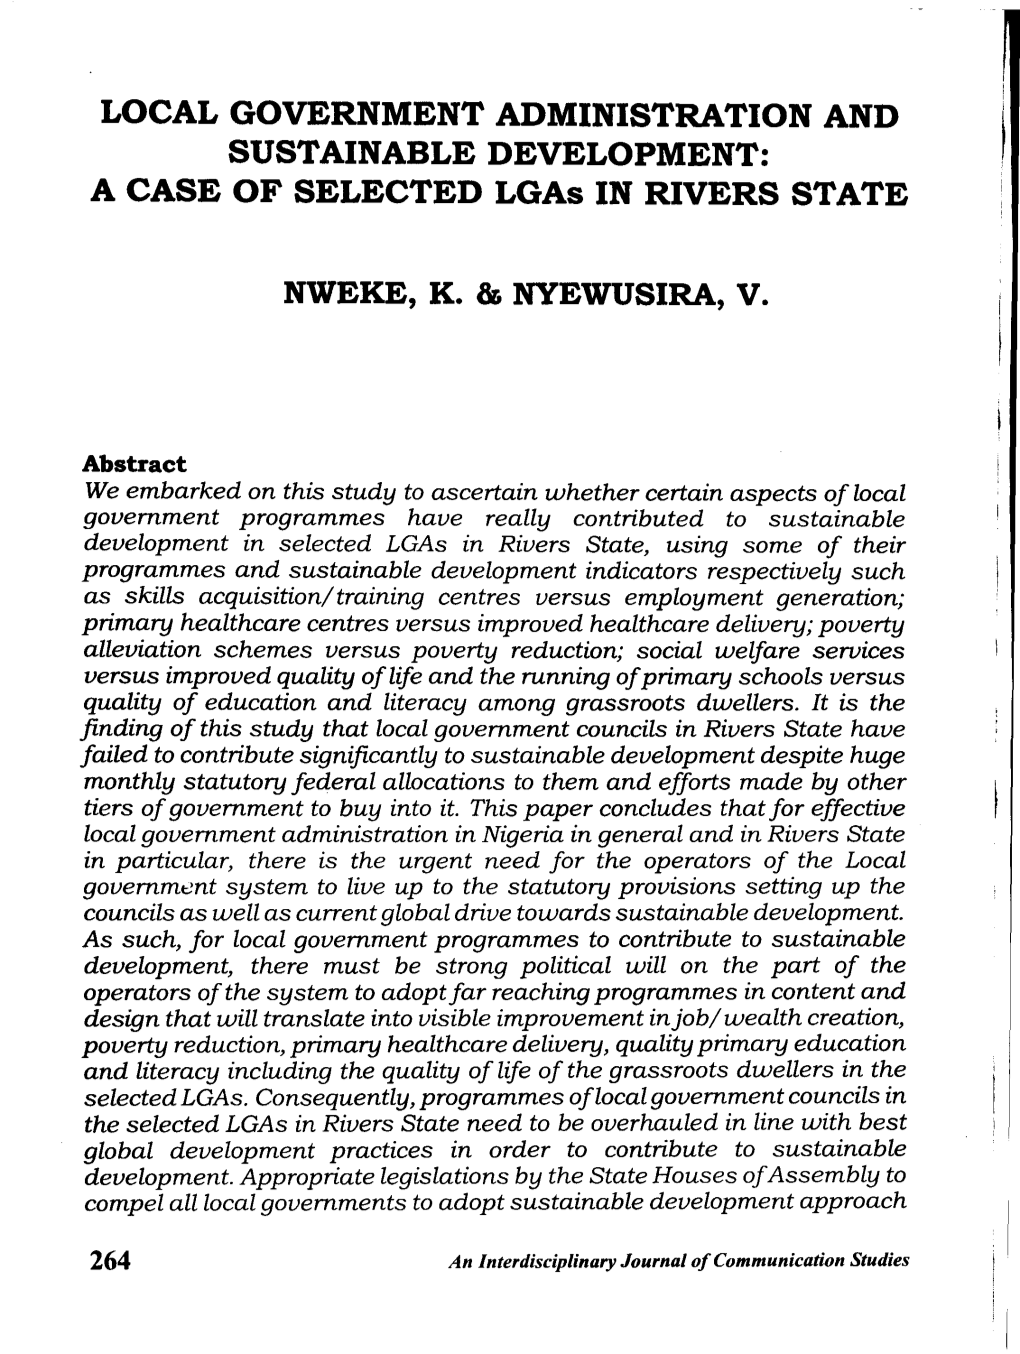 LOCAL GOVERNMENT ADMINISTRATION and SUSTAINABLE DEVELOPMENT: a CASE of SELECTED Lgas in RIVERS STATE